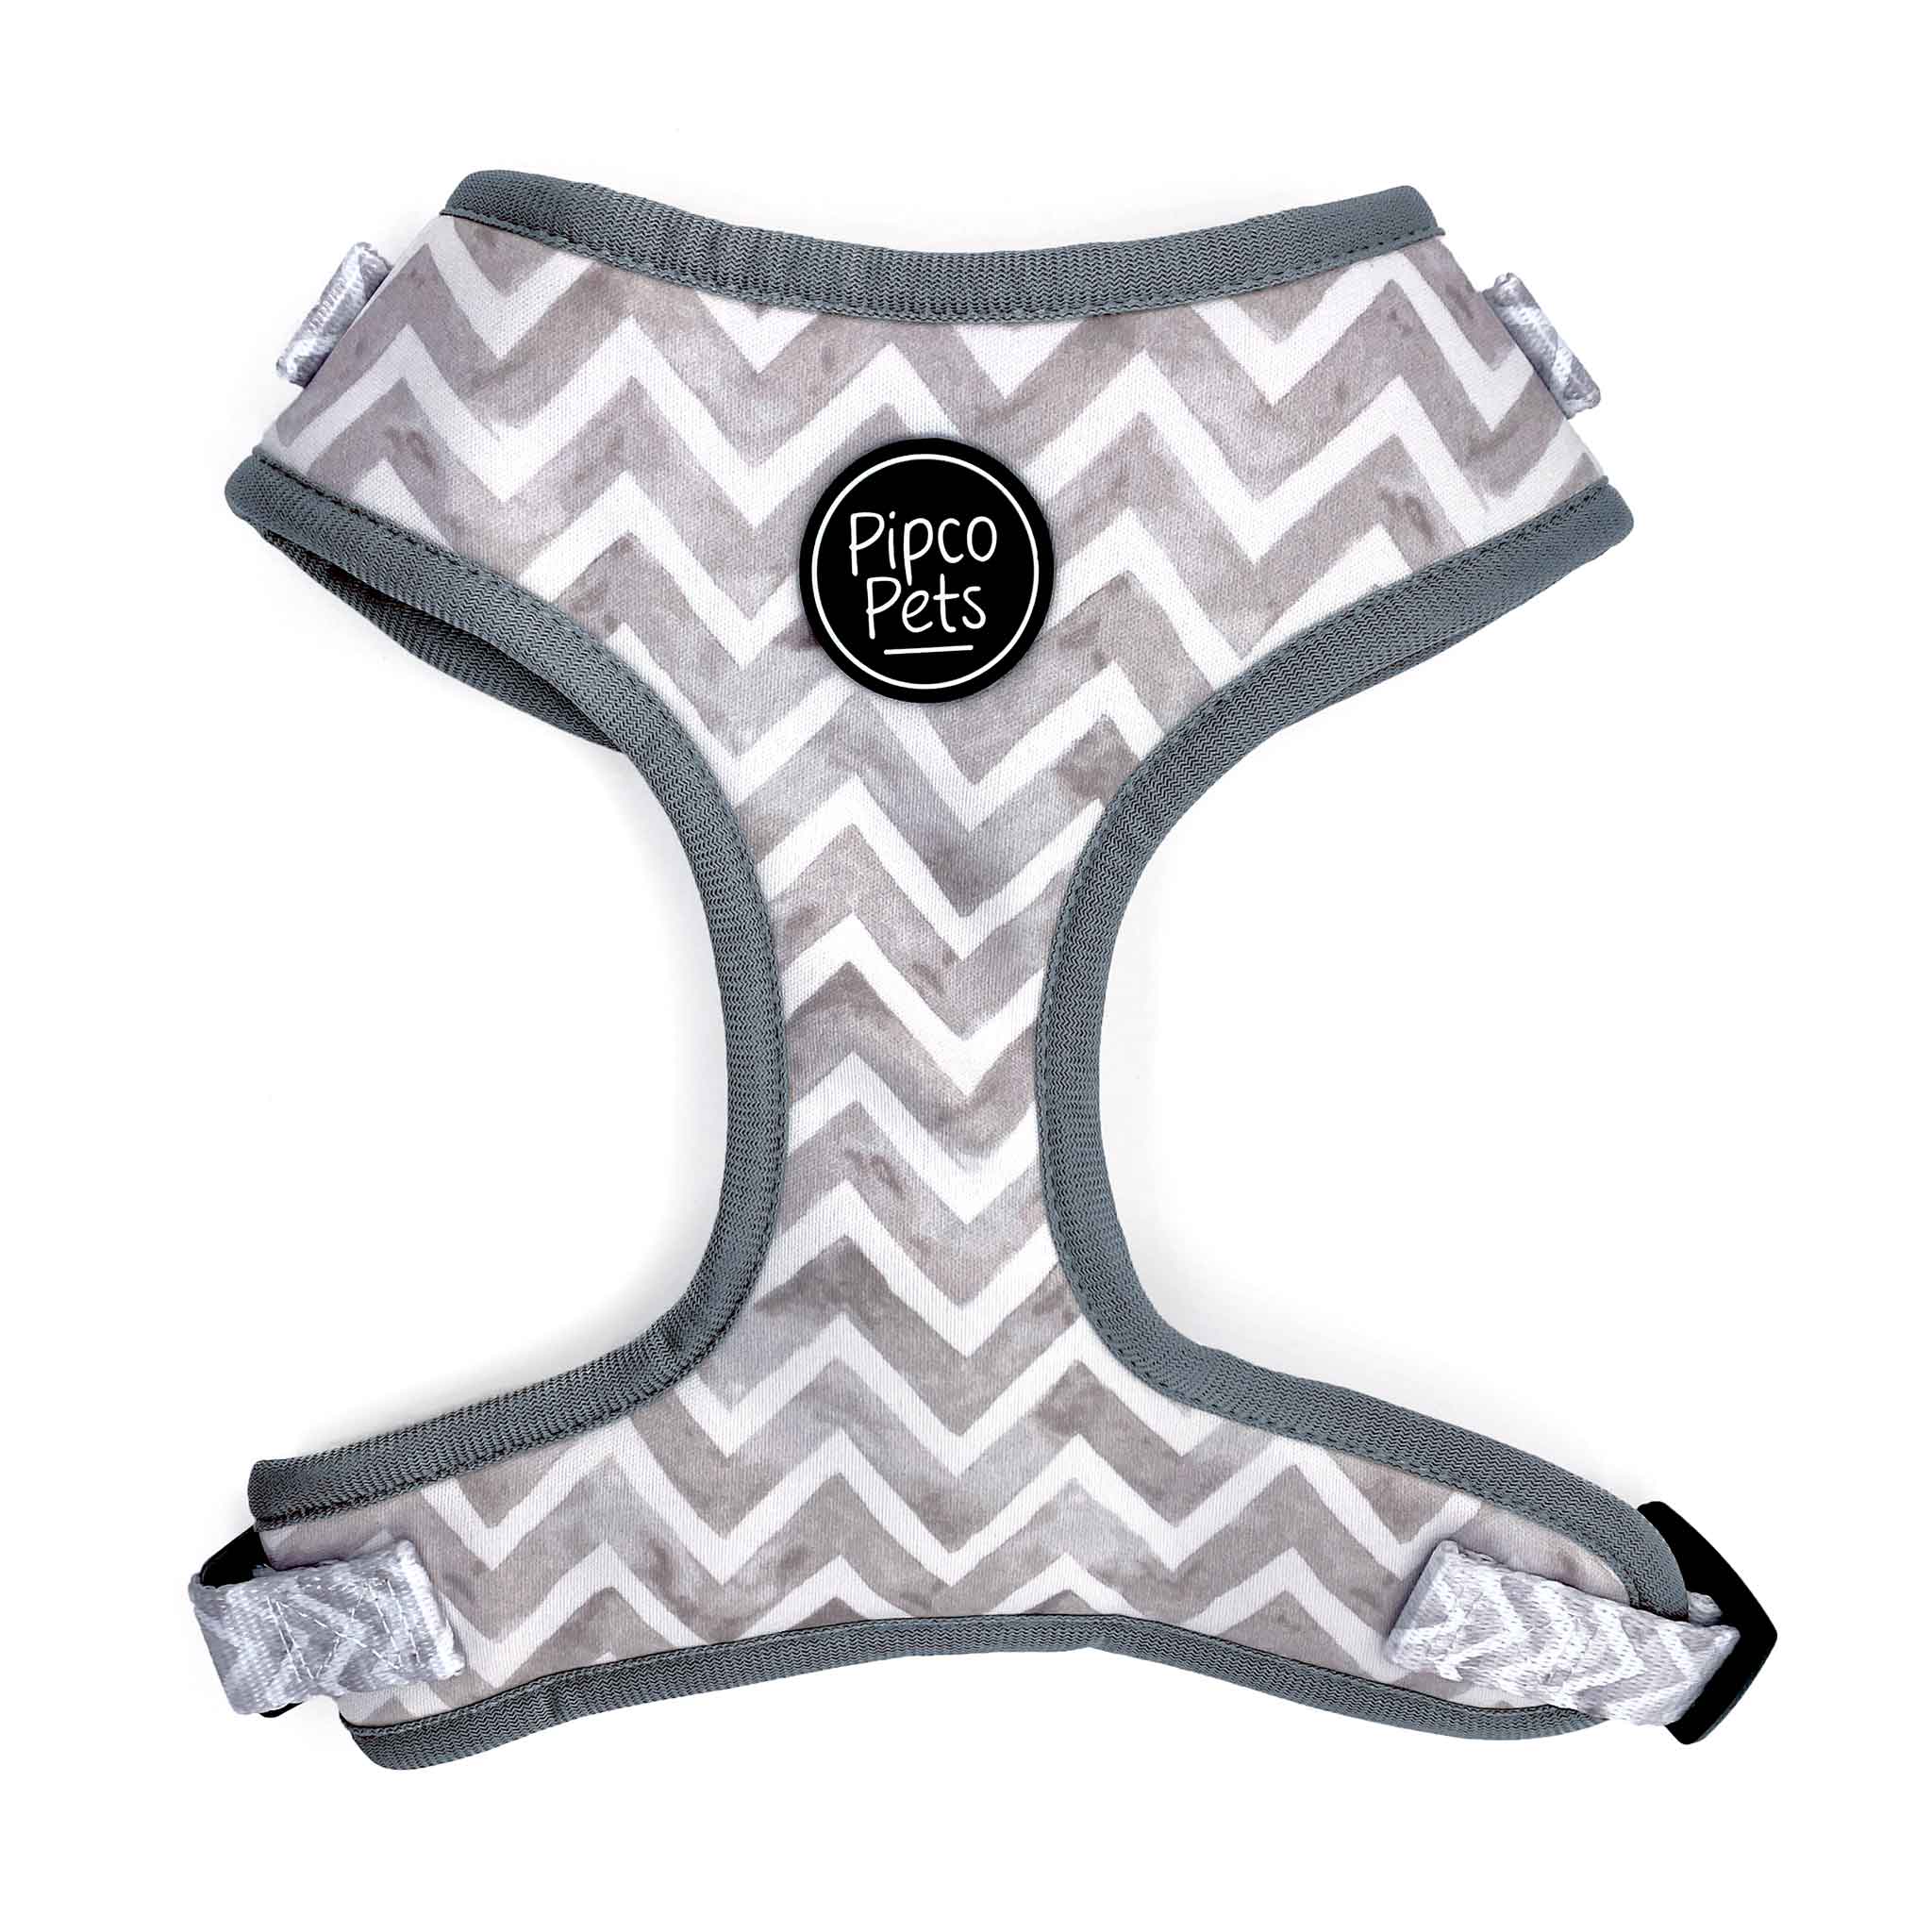 Front view of Pipco Pets adjustable dog harness with grey Zig Zags pattern